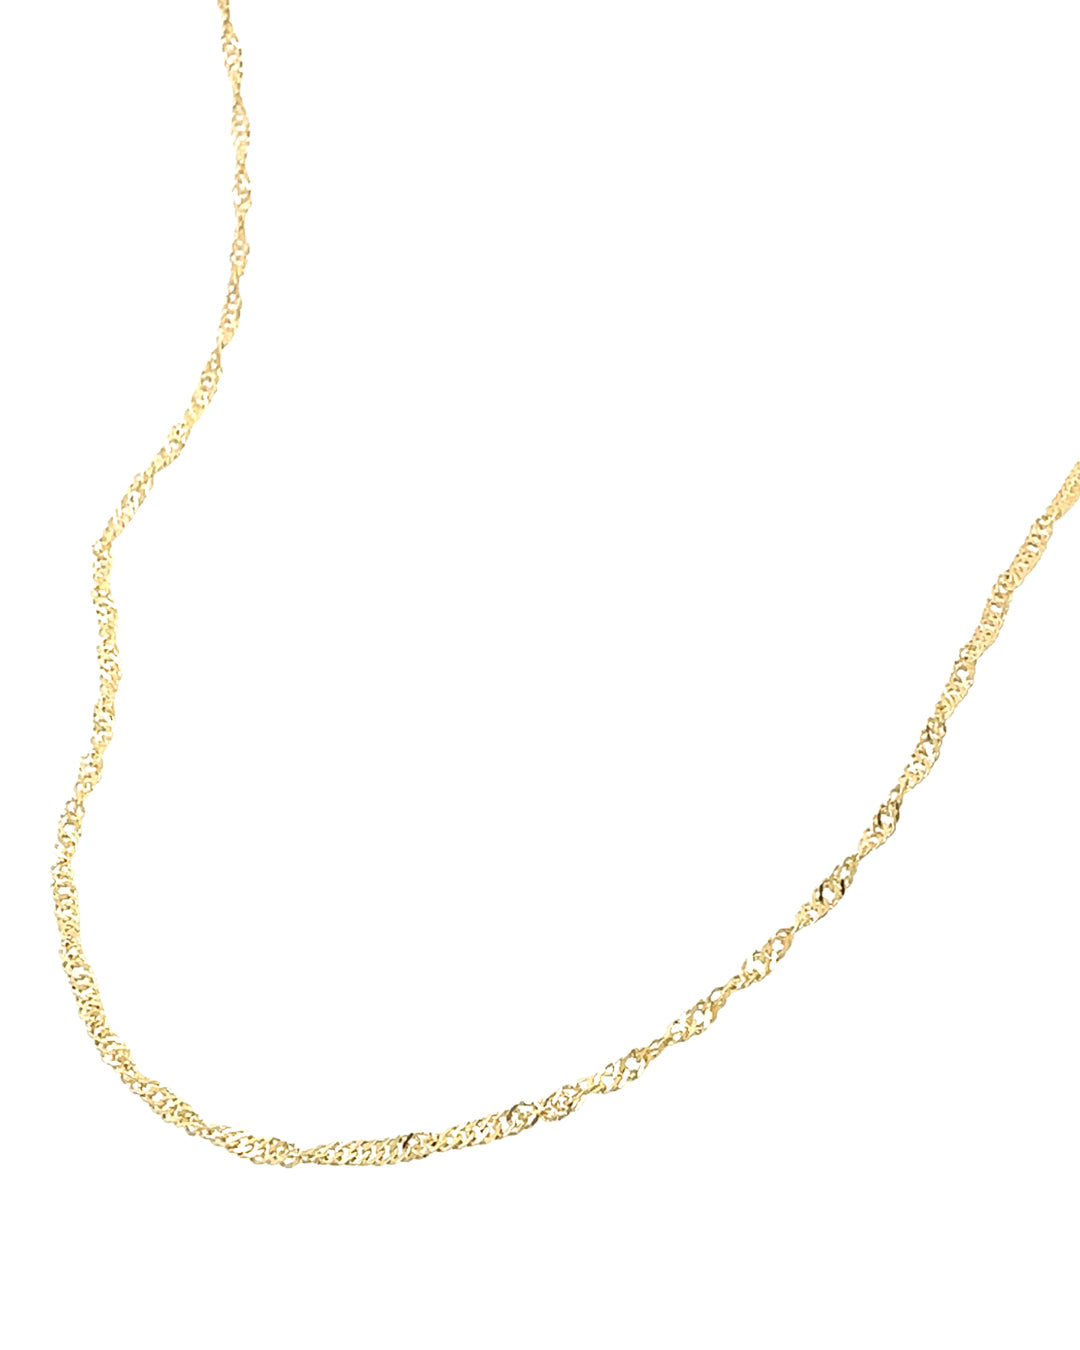 14k yellow gold fill singapore rope chain necklace 